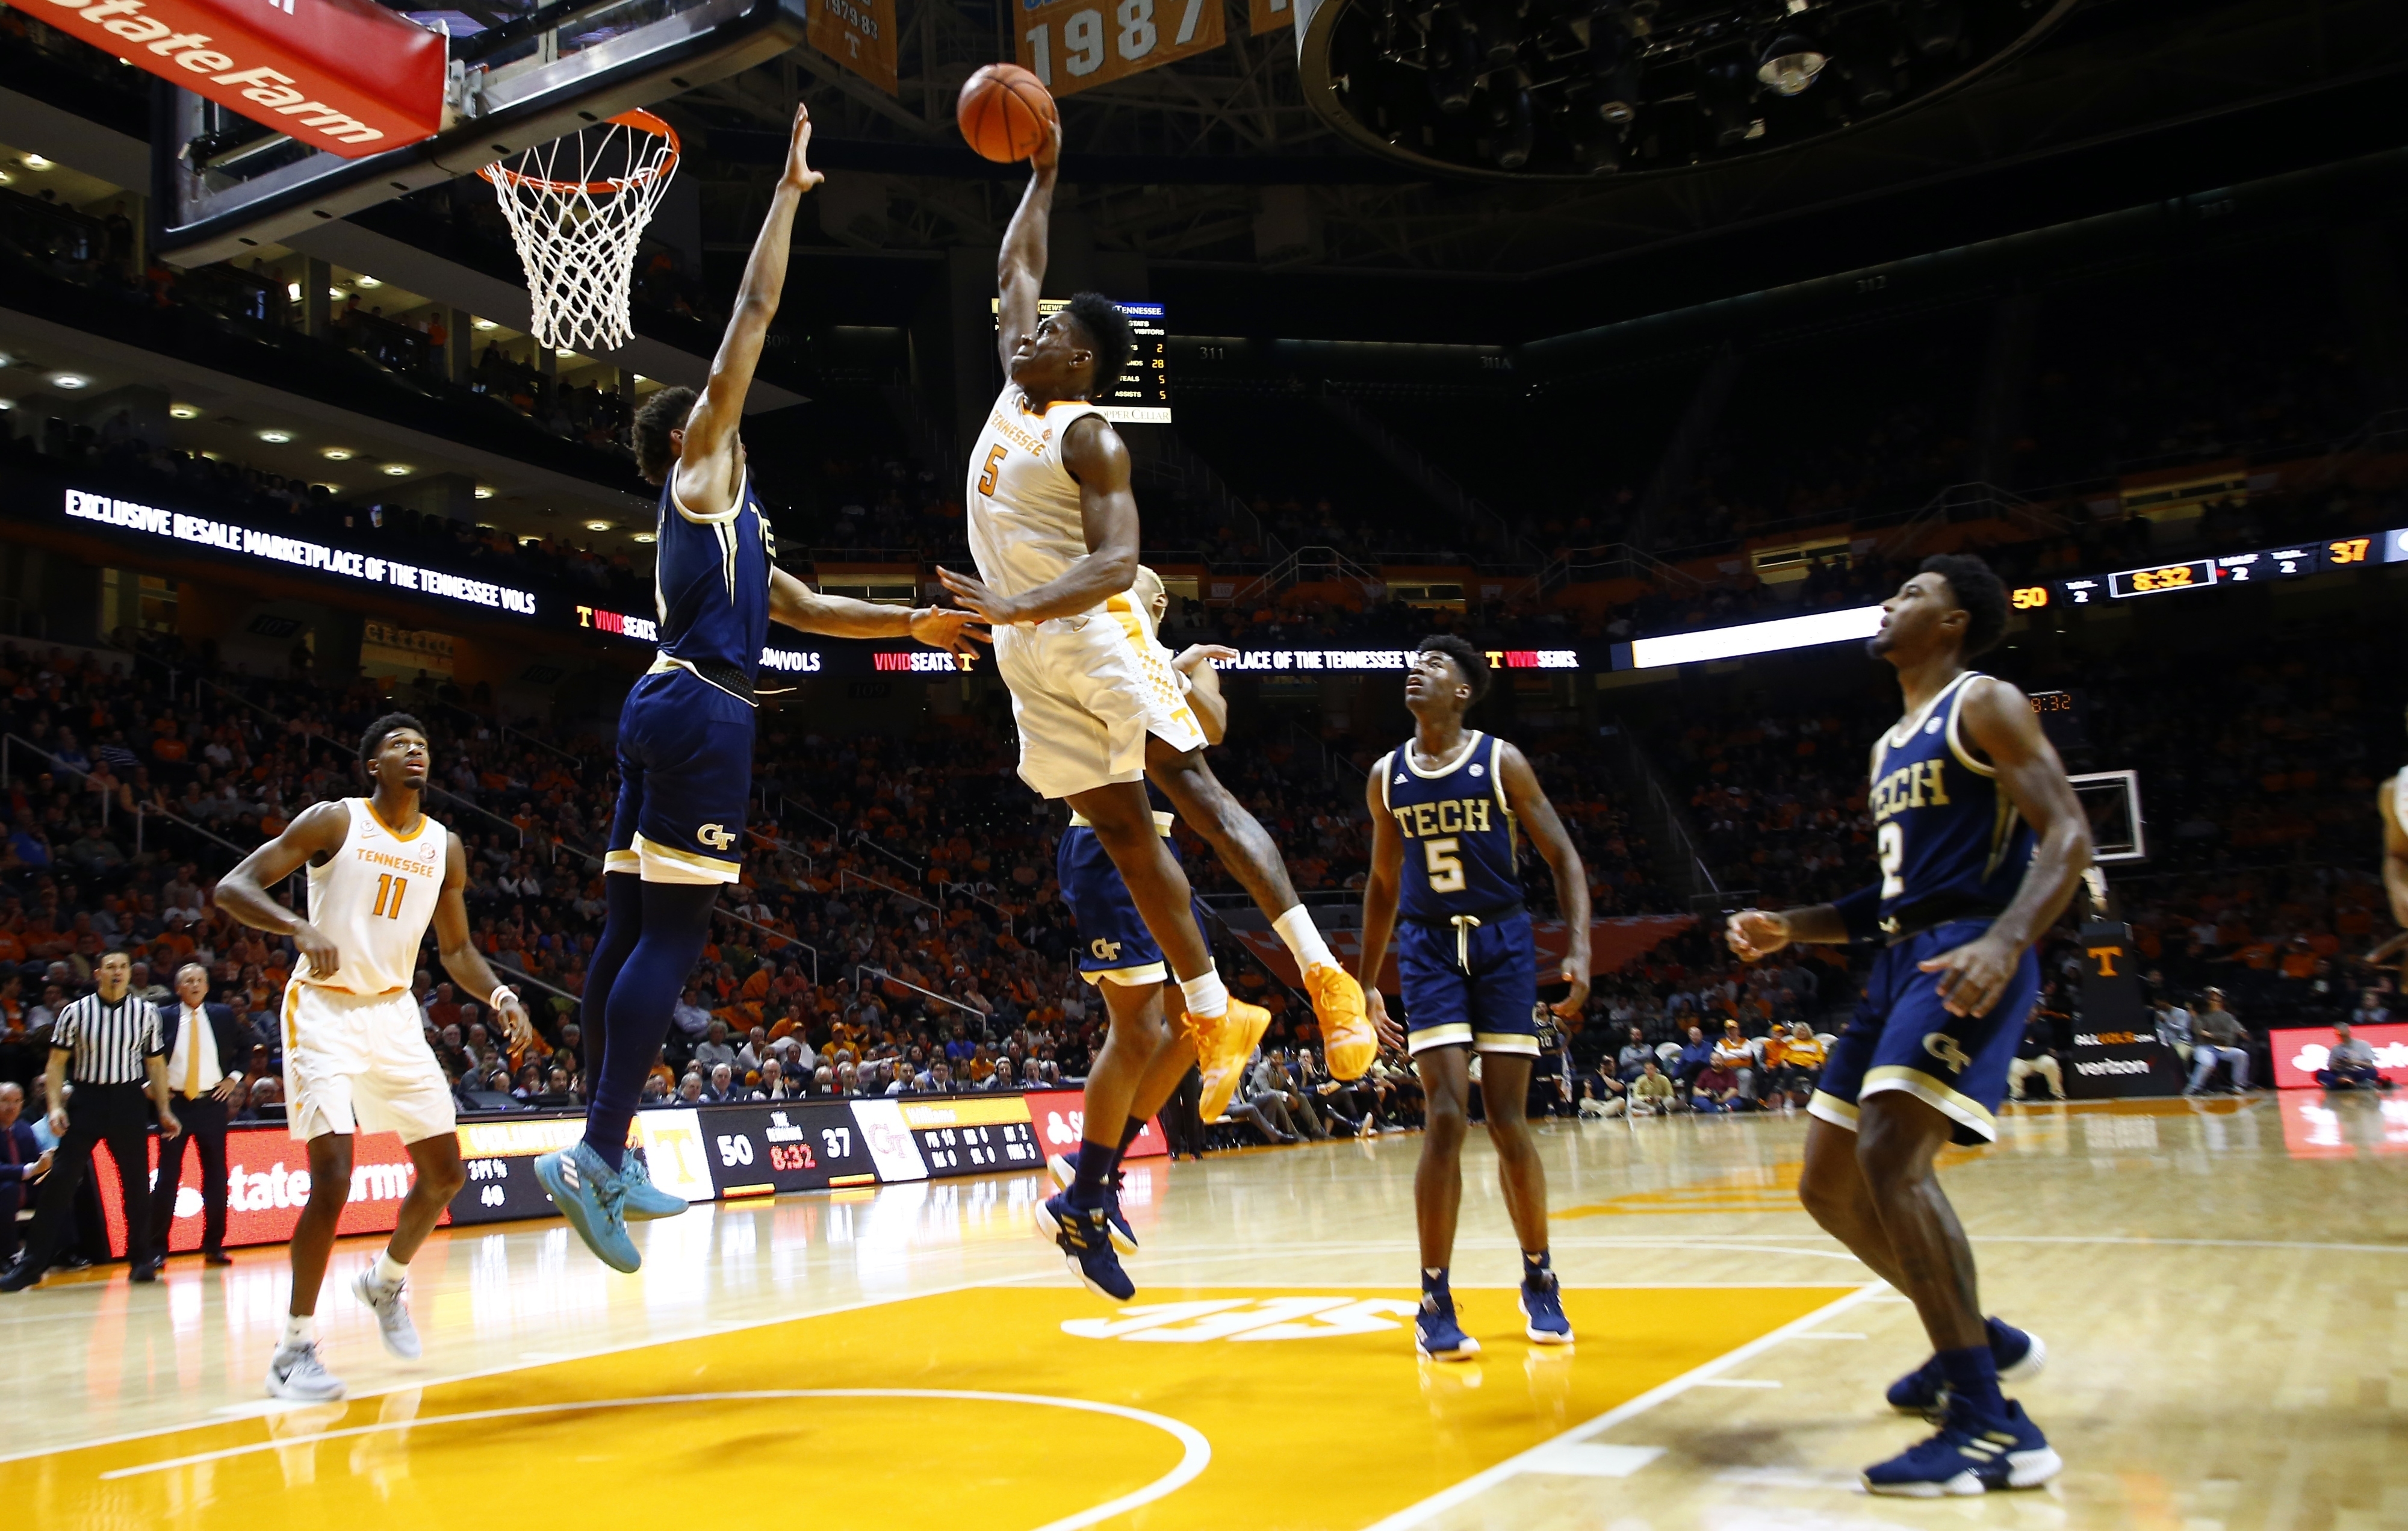 No. 5 Tennessee clamps down on defense to beat Georgia Tech